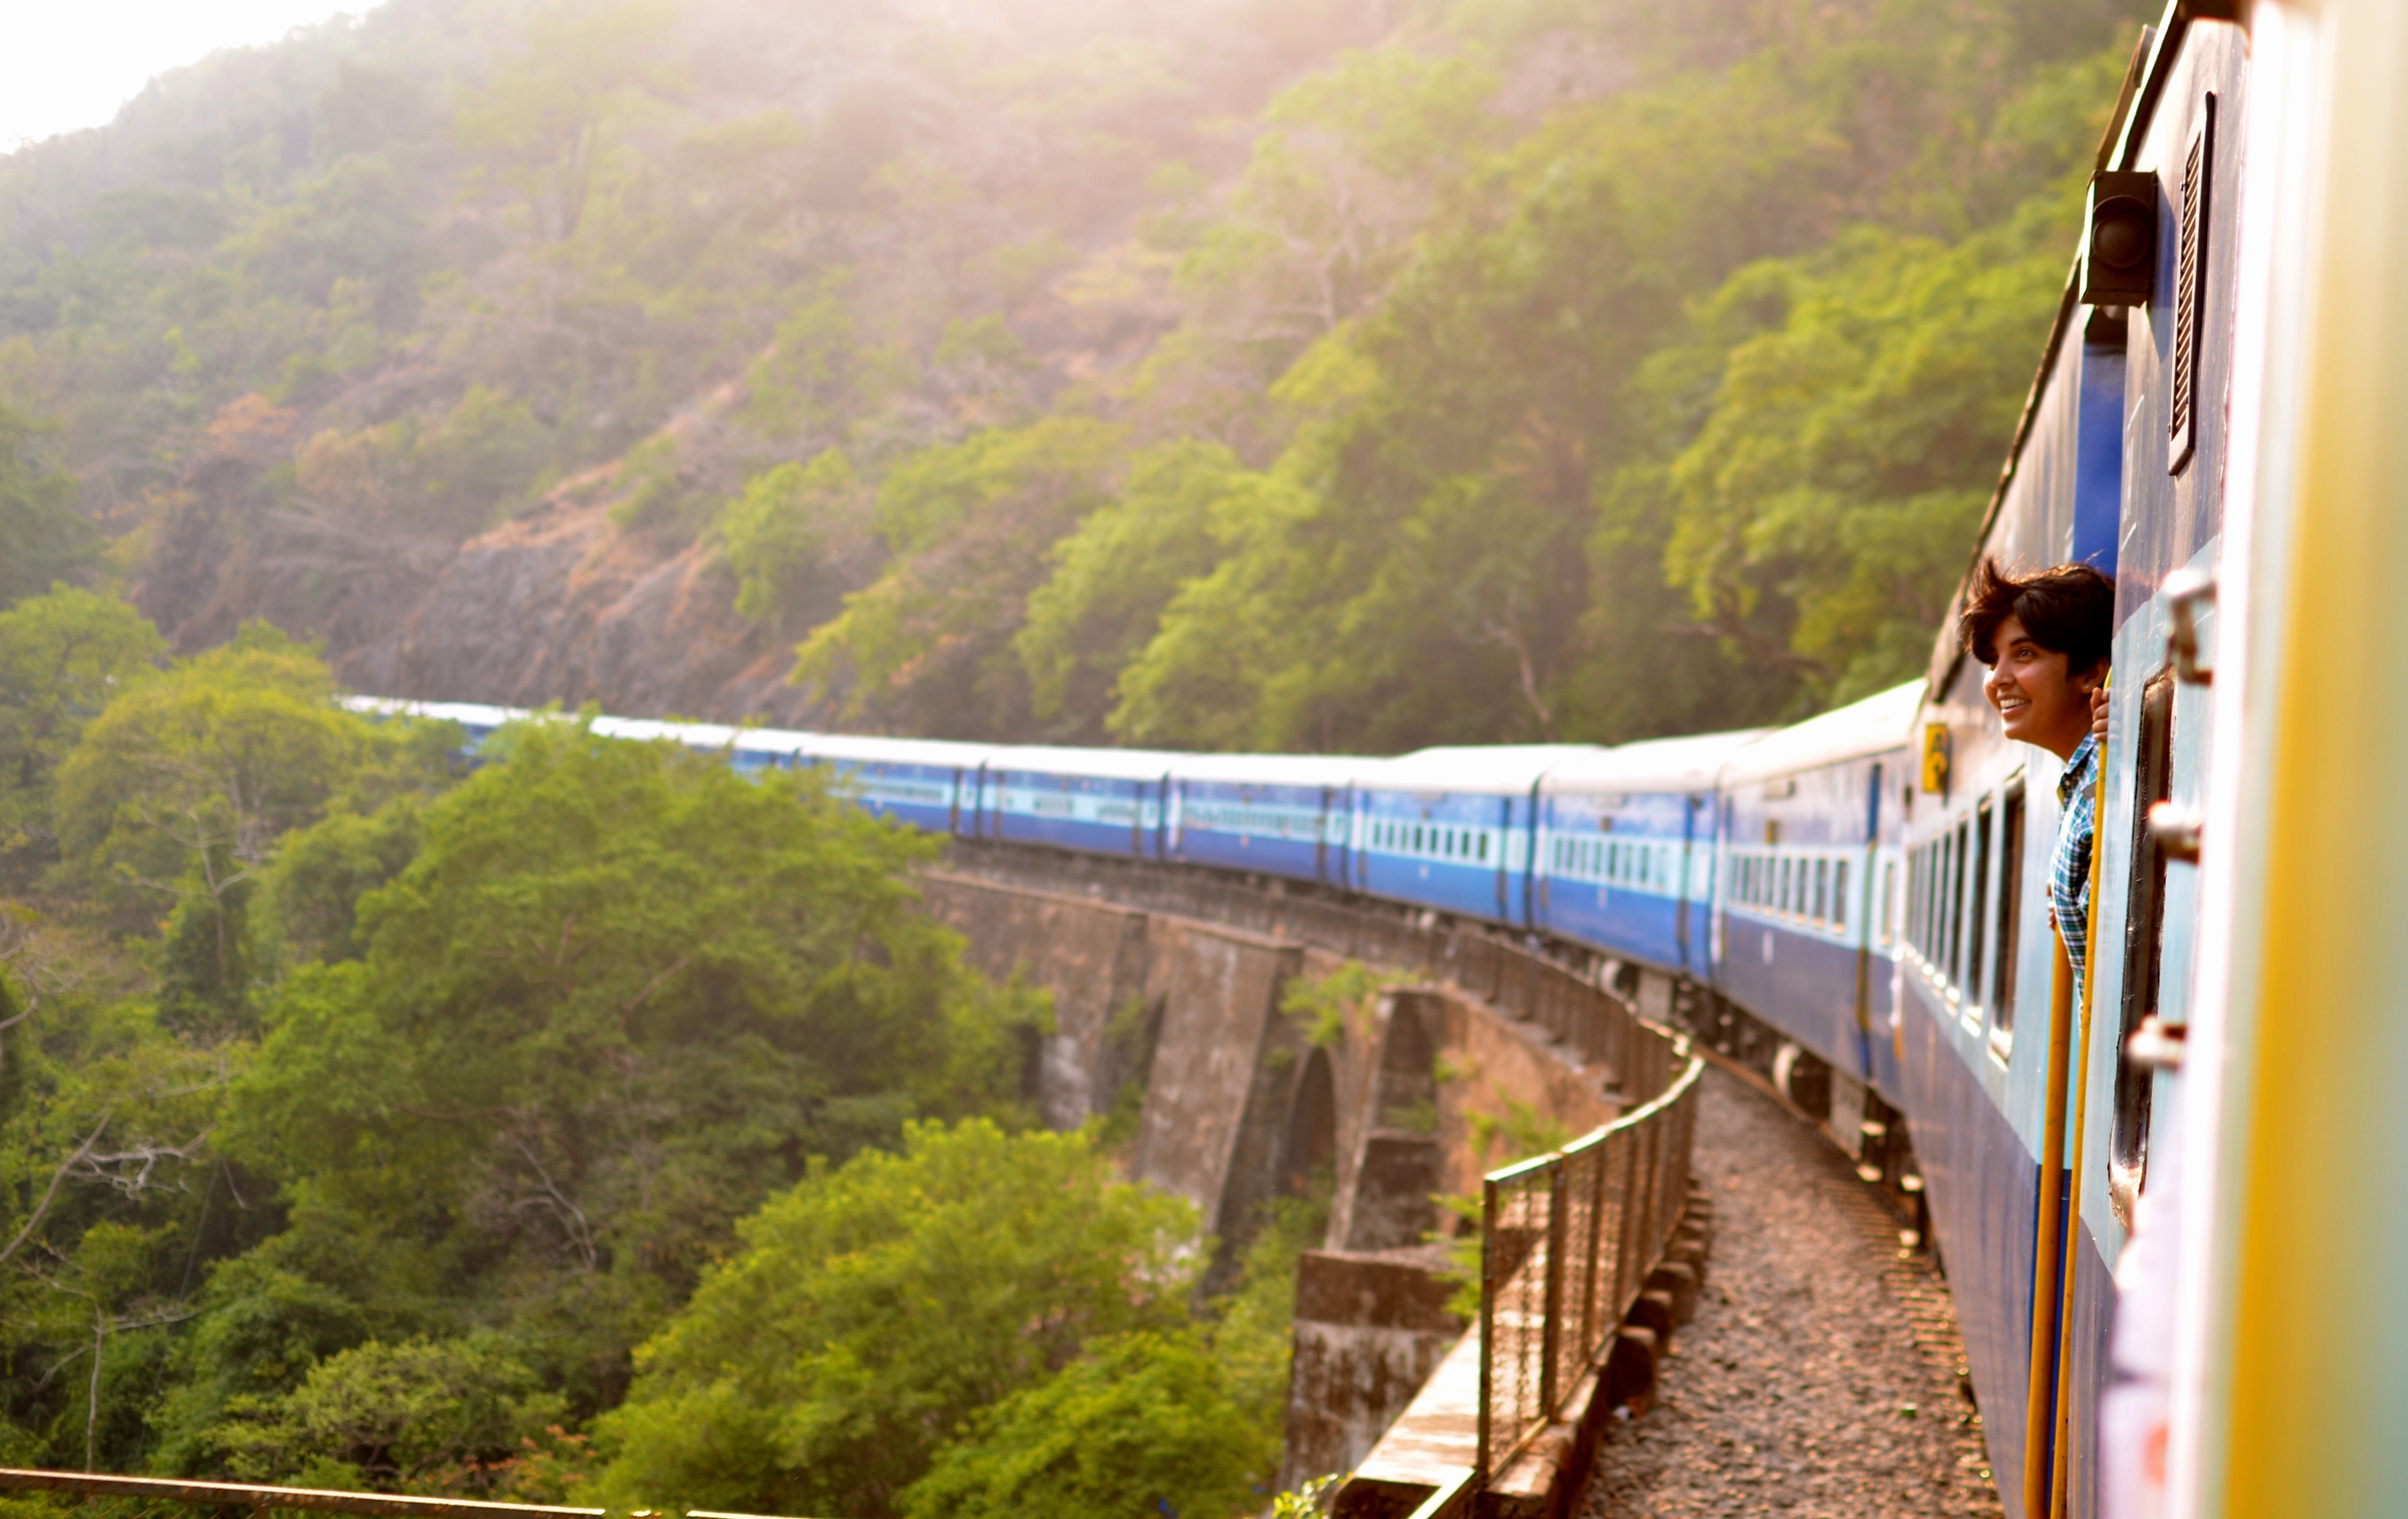 is train journey safe in india